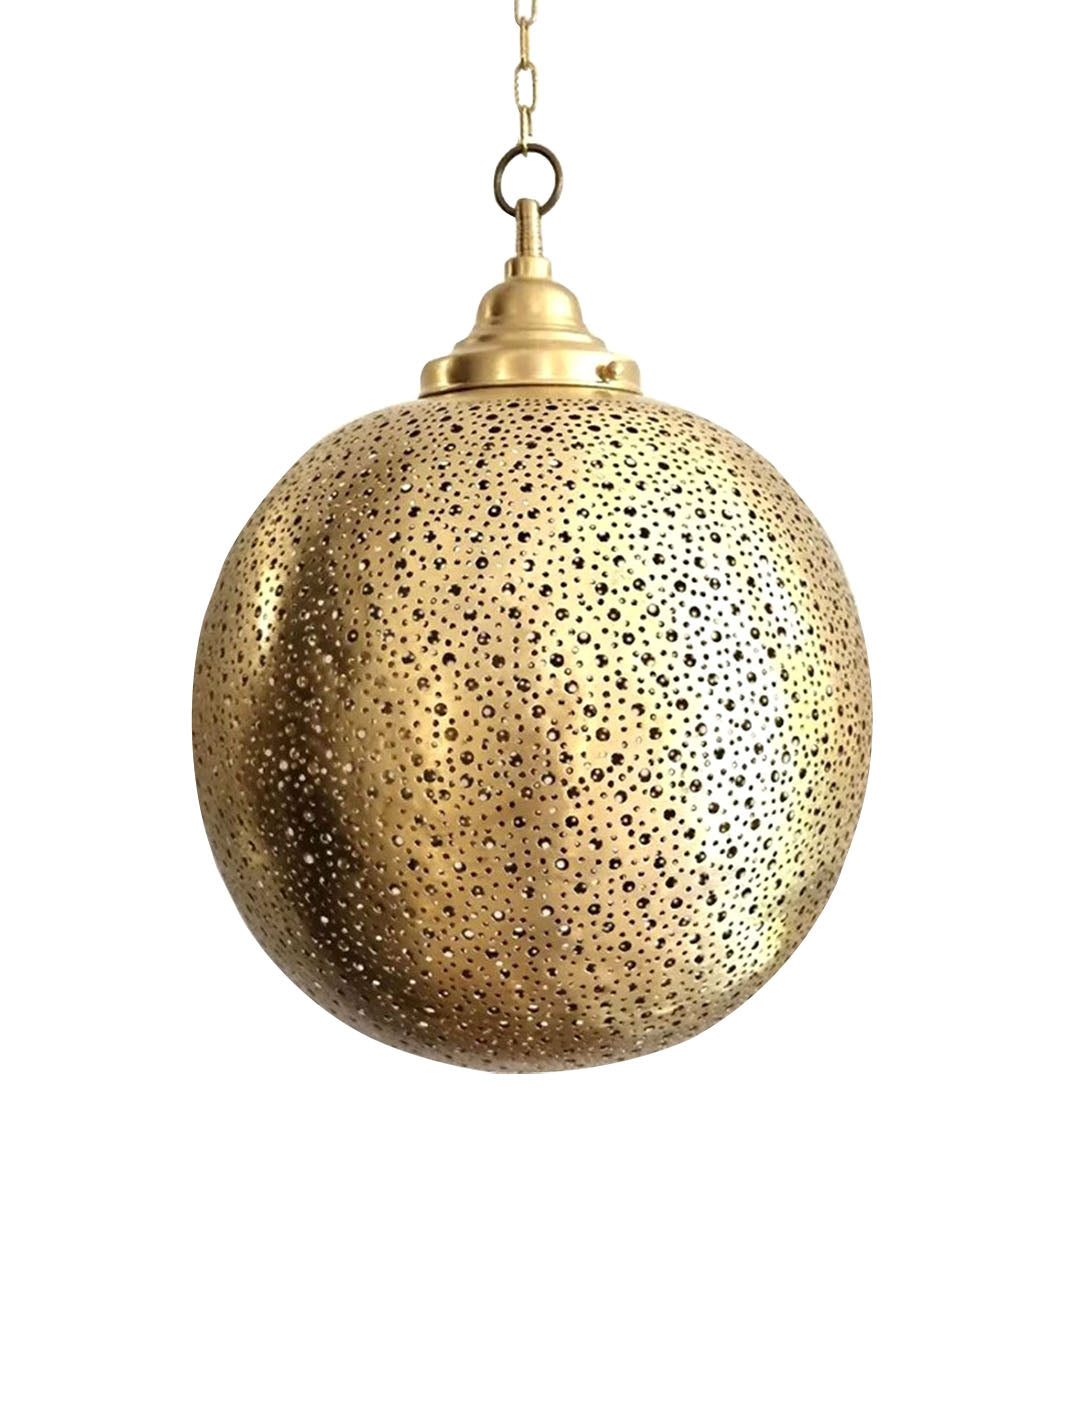 Handcrafted Modern Brass Ceiling Ball Lamp | Moroccan Suspension Libitii Ceiling Light Fixtures LIB-0170